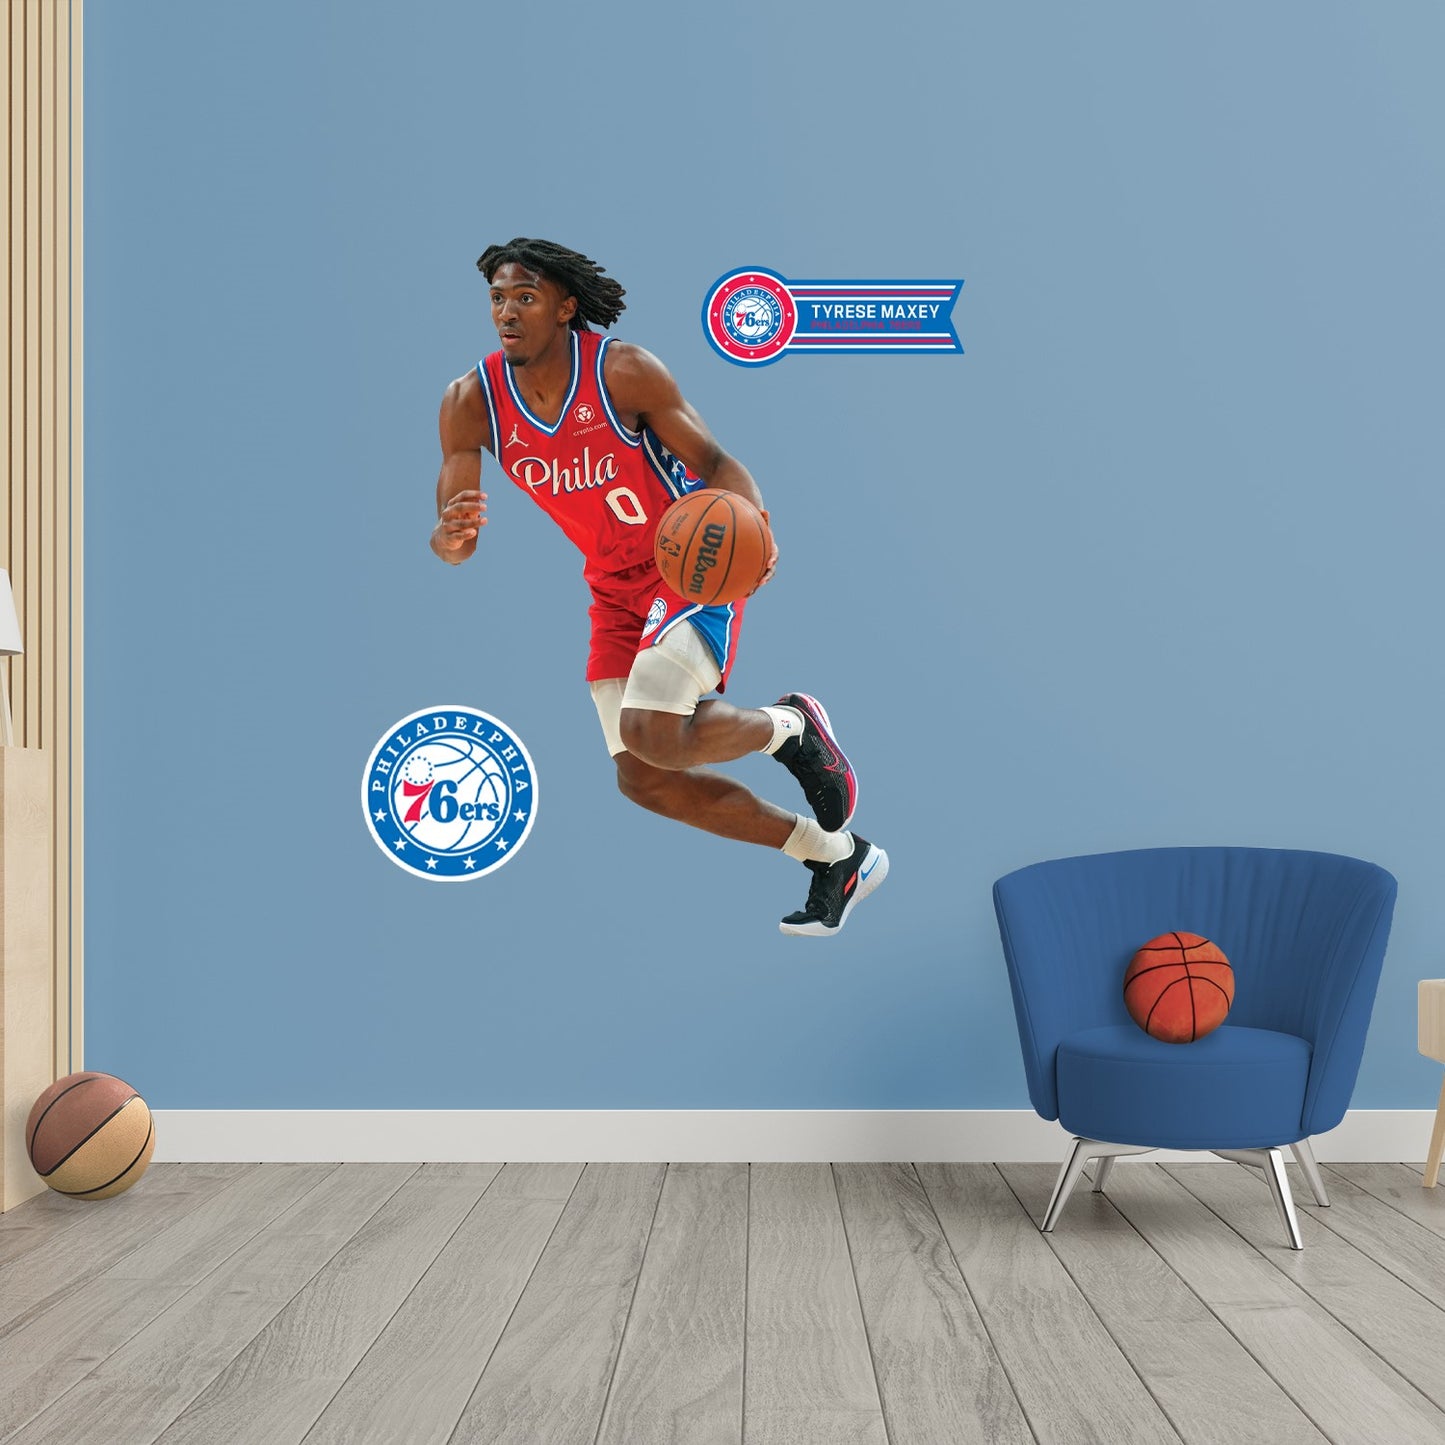 Philadelphia 76ers: Tyrese Maxey - Officially Licensed NBA Removable Adhesive Decal